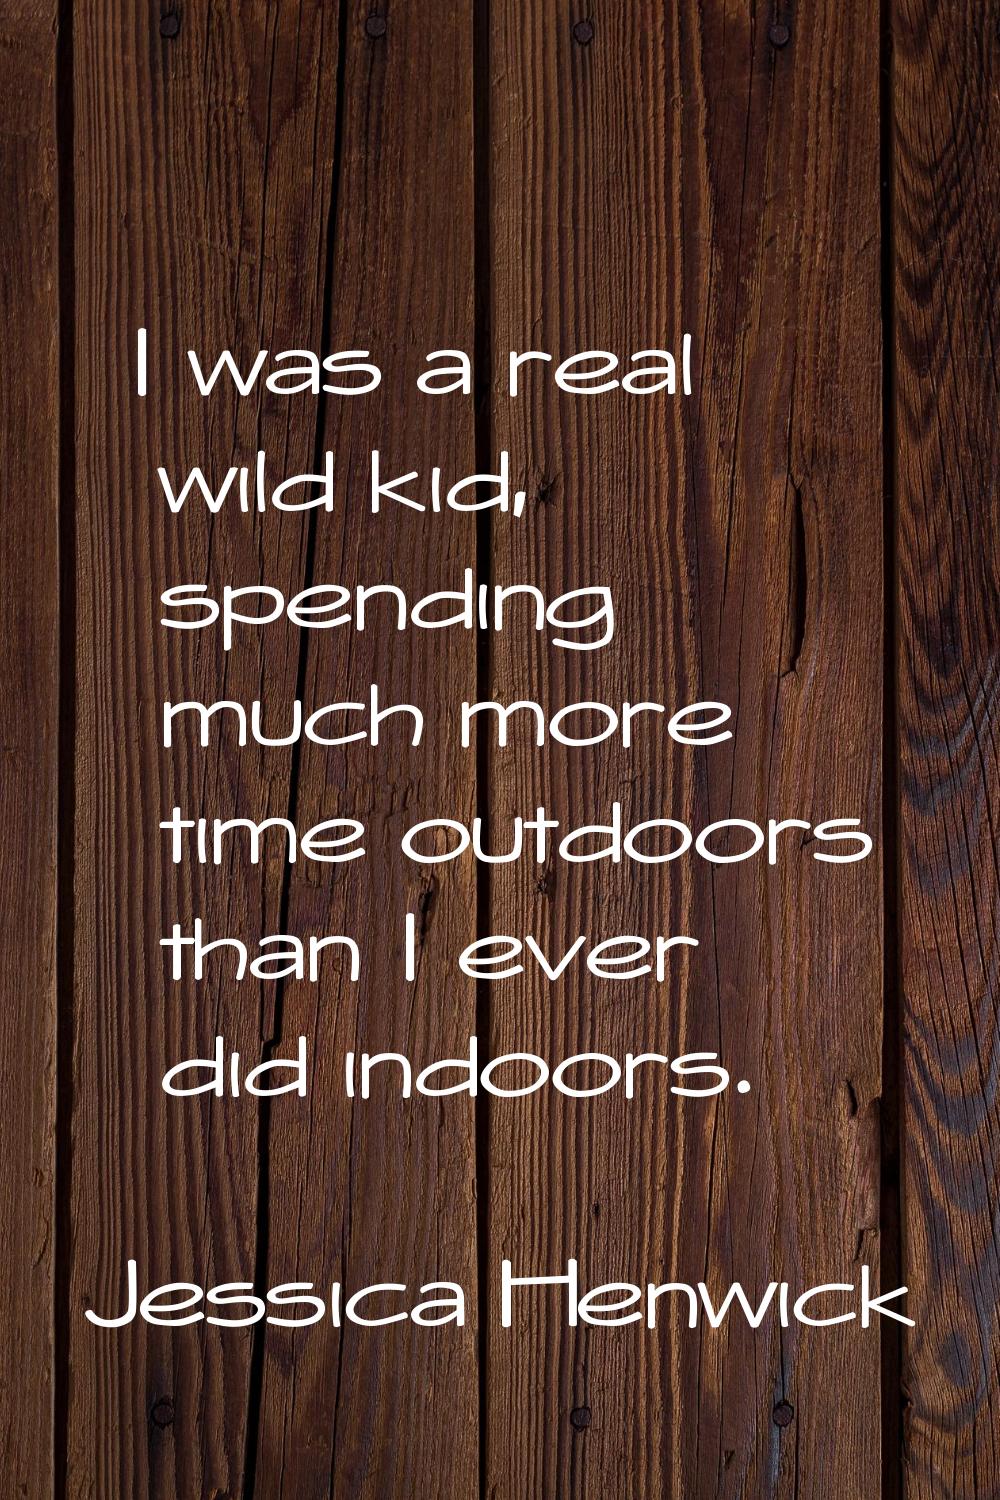 I was a real wild kid, spending much more time outdoors than I ever did indoors.